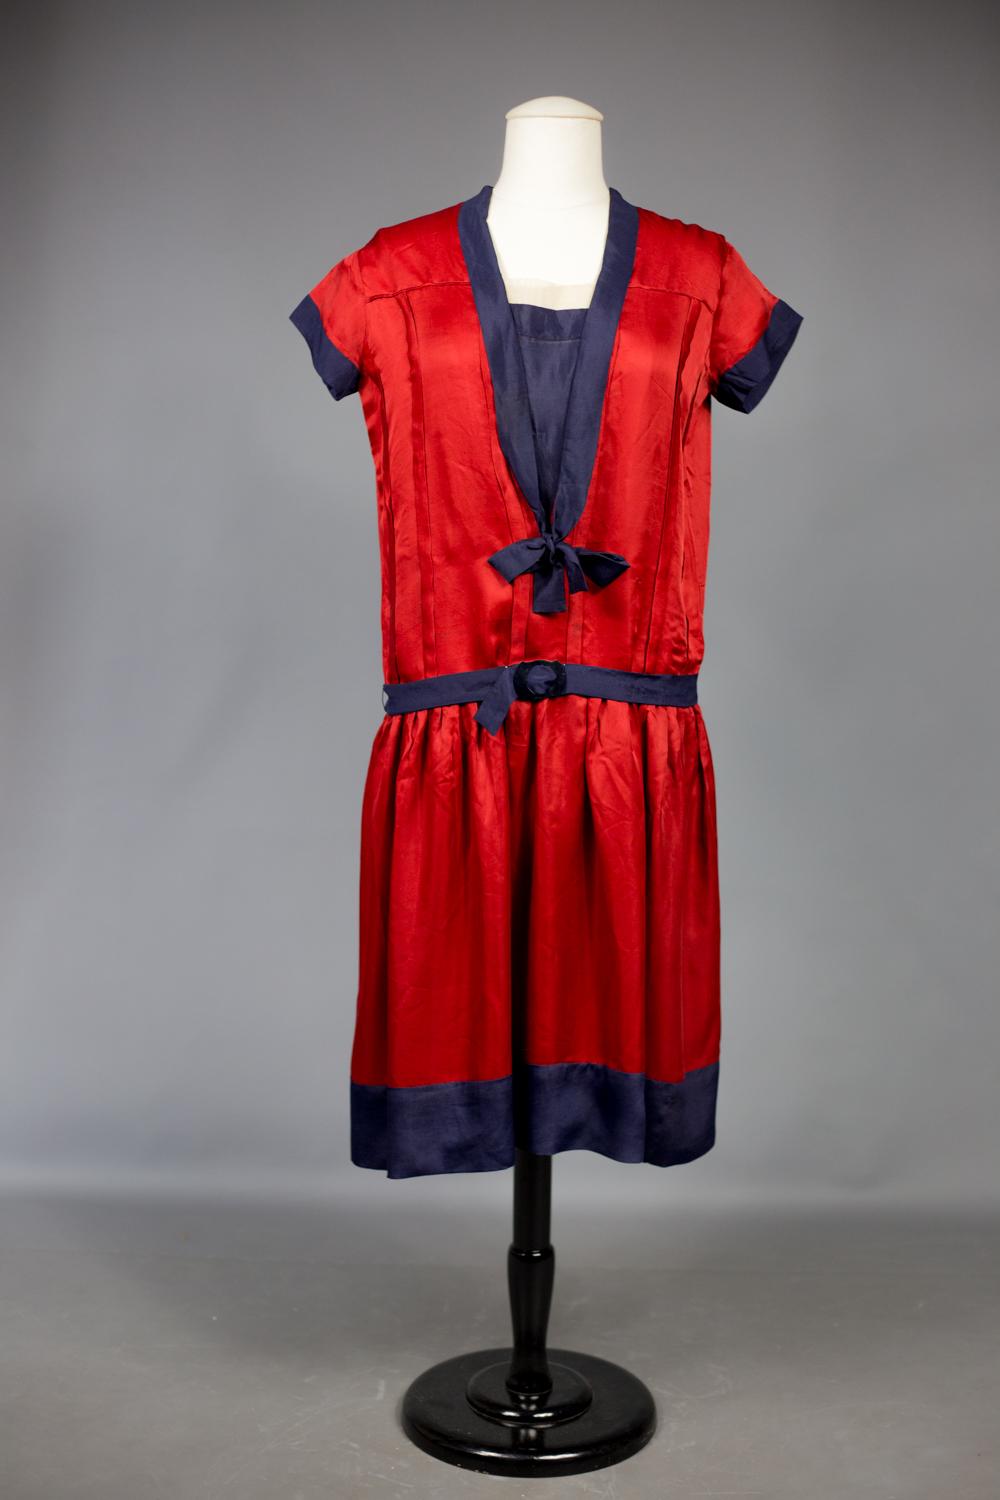 Circa 1920/1925
France
 
Beautiful sailor dress in cherry red Duchesse satin in the patriotic spirit of France after the First World War. Straight dress with short sleeve and pleated on the bust and underlined with navy crepe.. Sailor collar trimmed